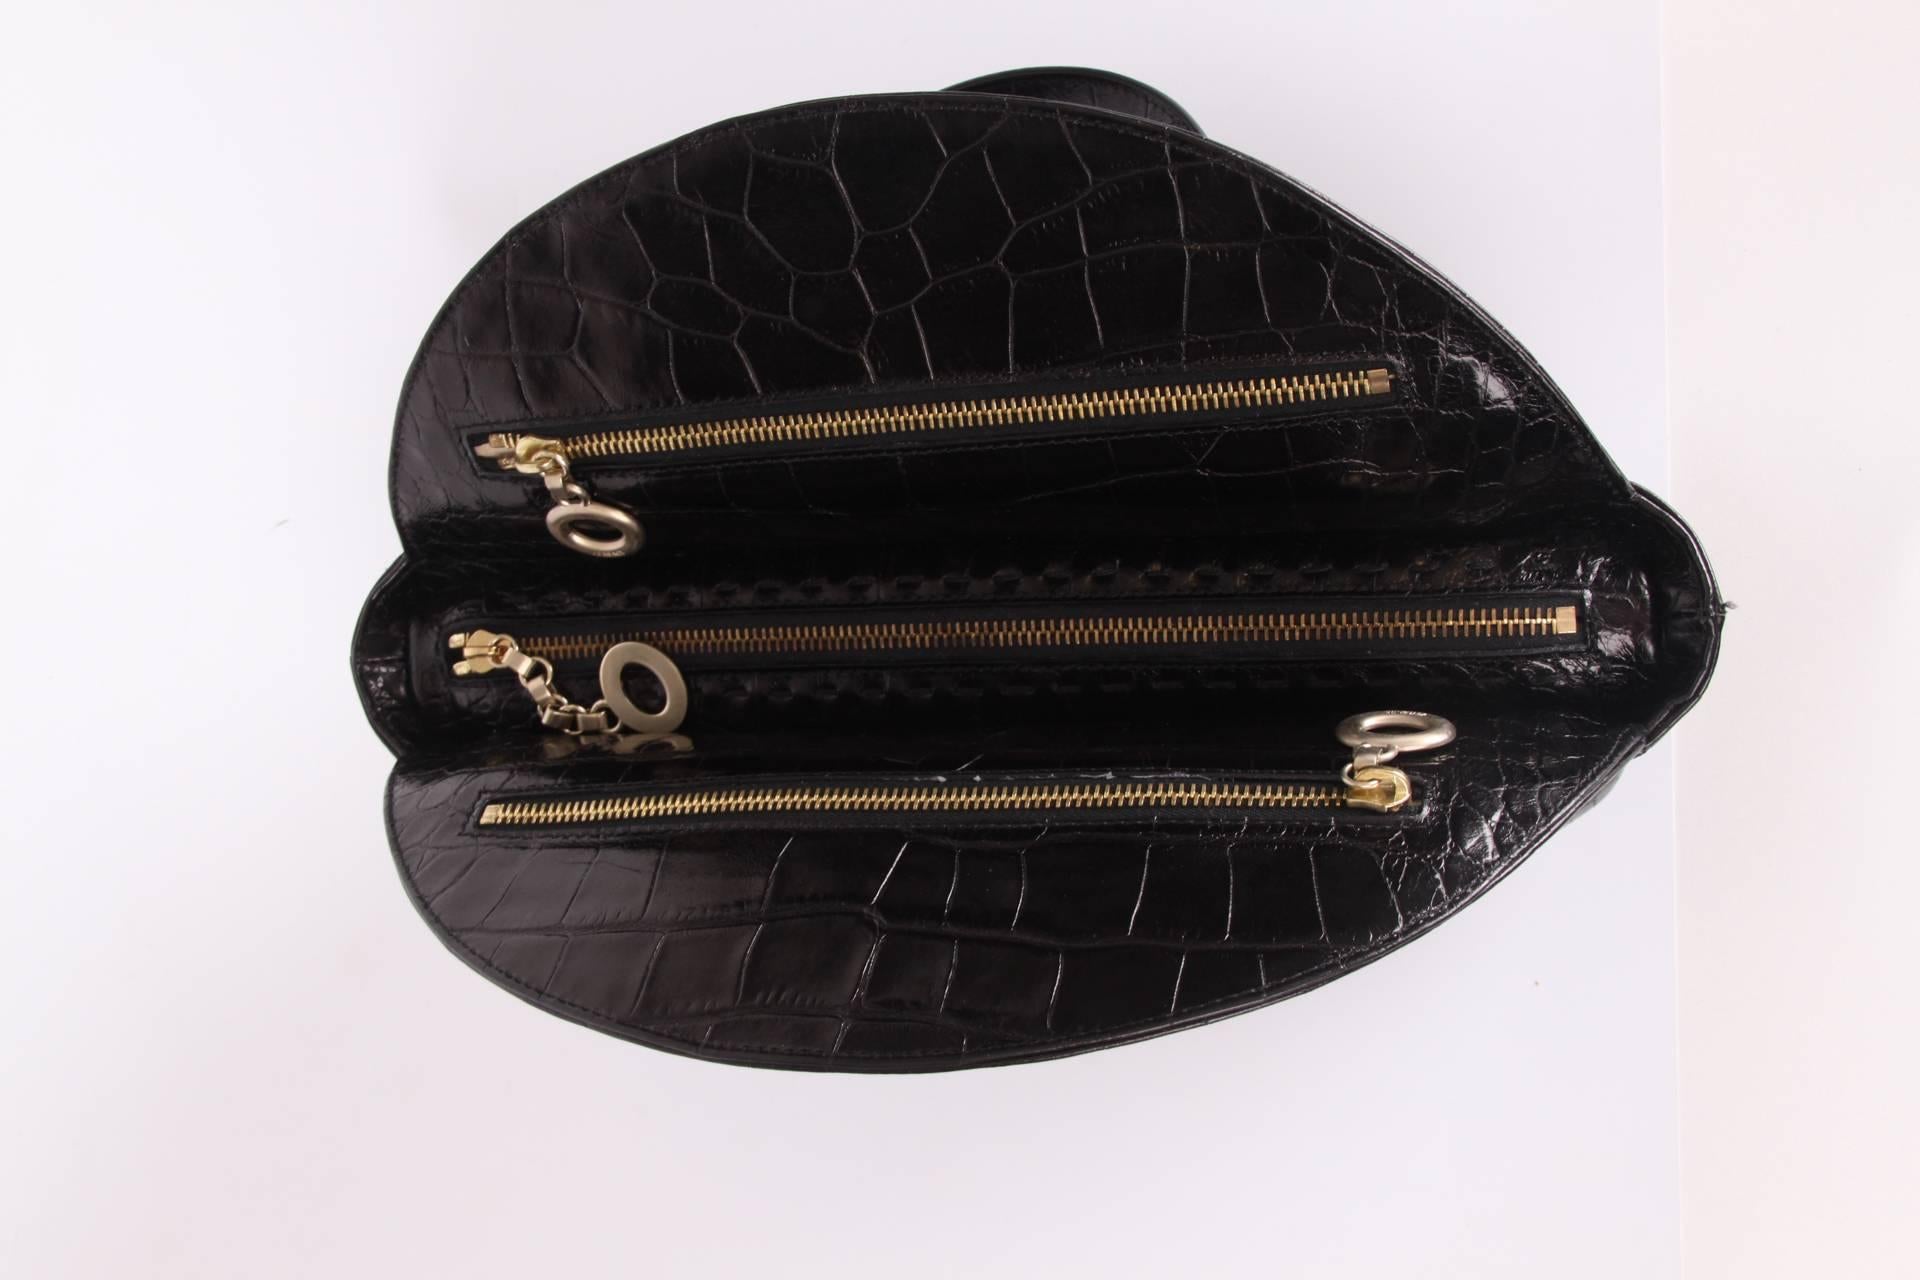 Stylish bag in black leather covered with a croco print by Versace.

This round bag has a compartment with flap and push button on the front and back. Two handles on top, zip closure. Matte gold-tone hardware.

Interior lining in nude coloured